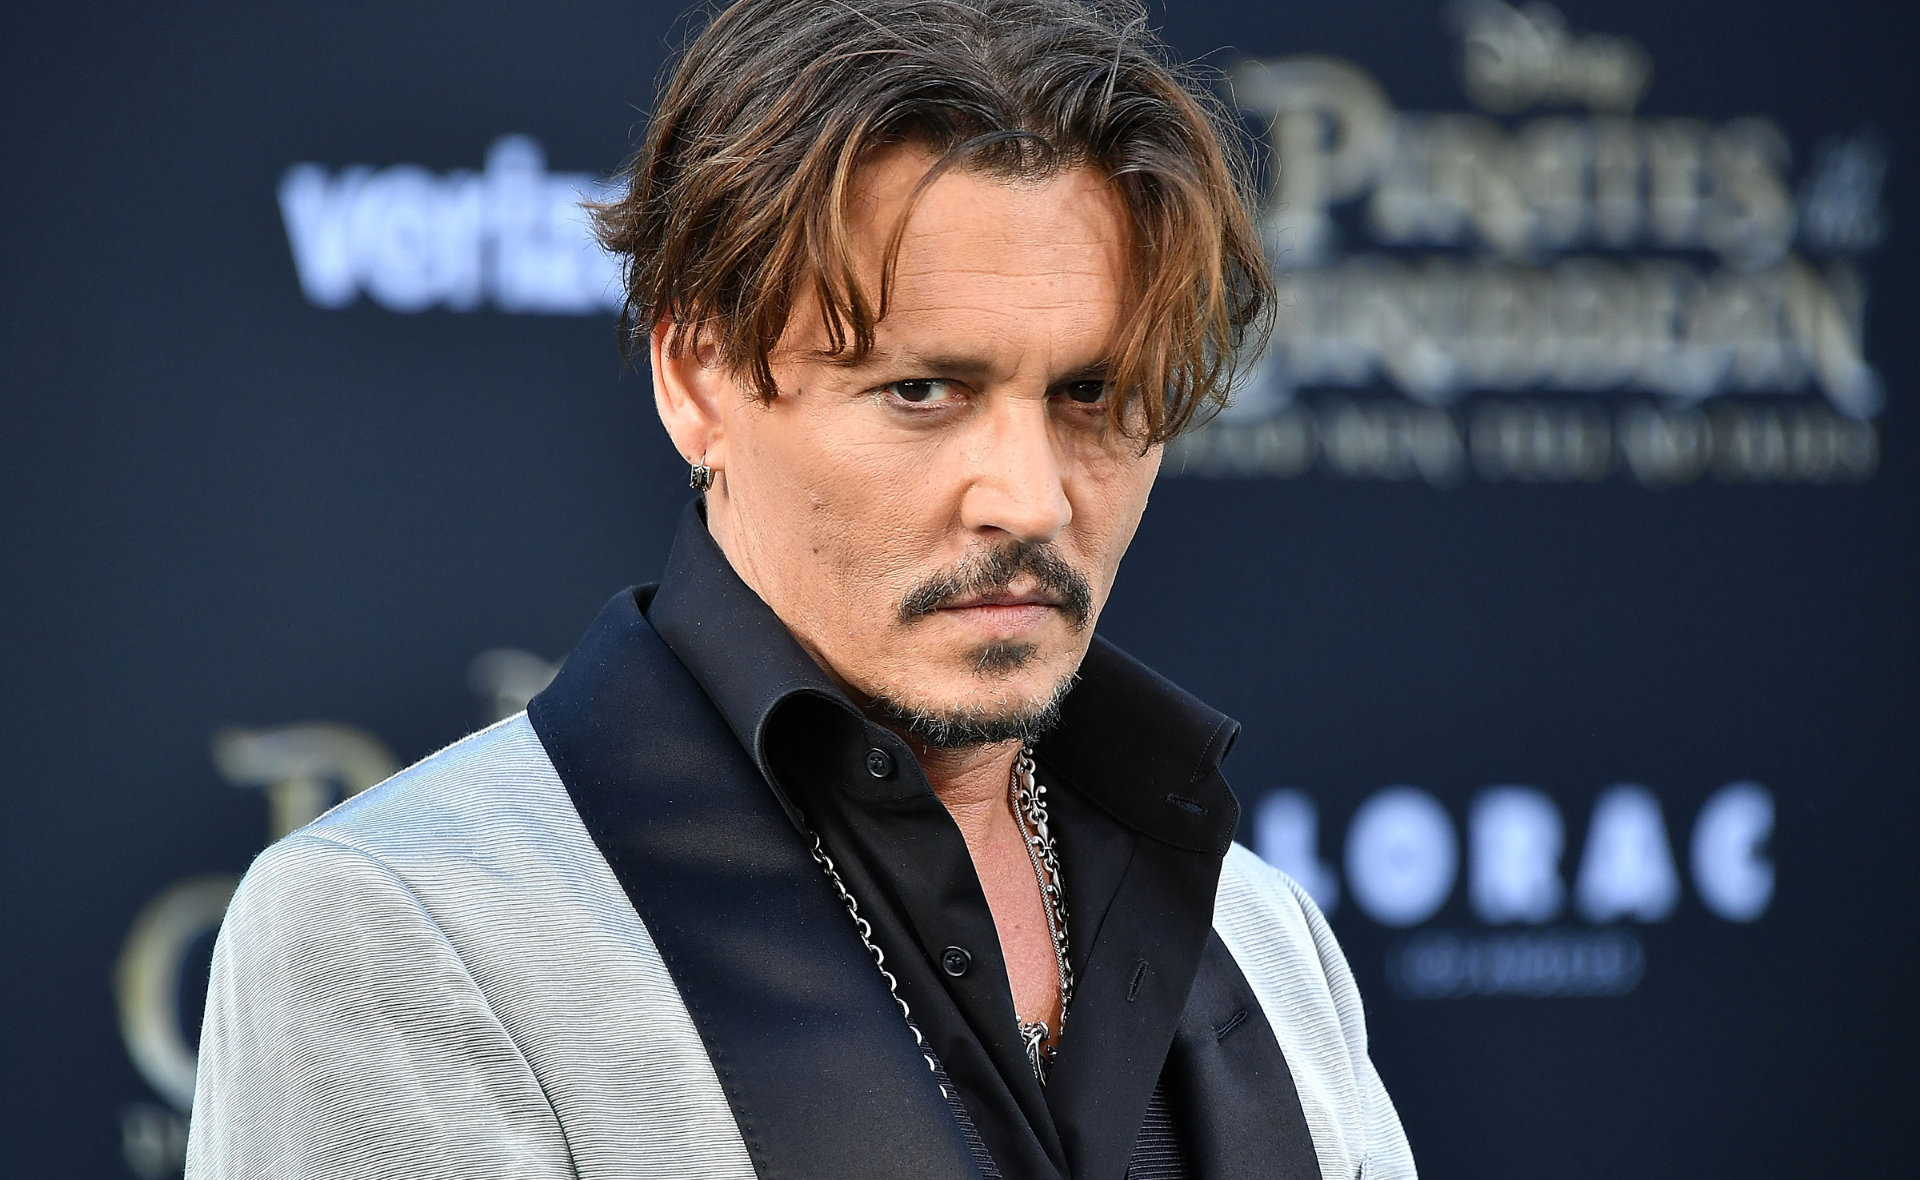 Johnny Depp rumoured to be making a potential comeback to Pirates of the Caribbean